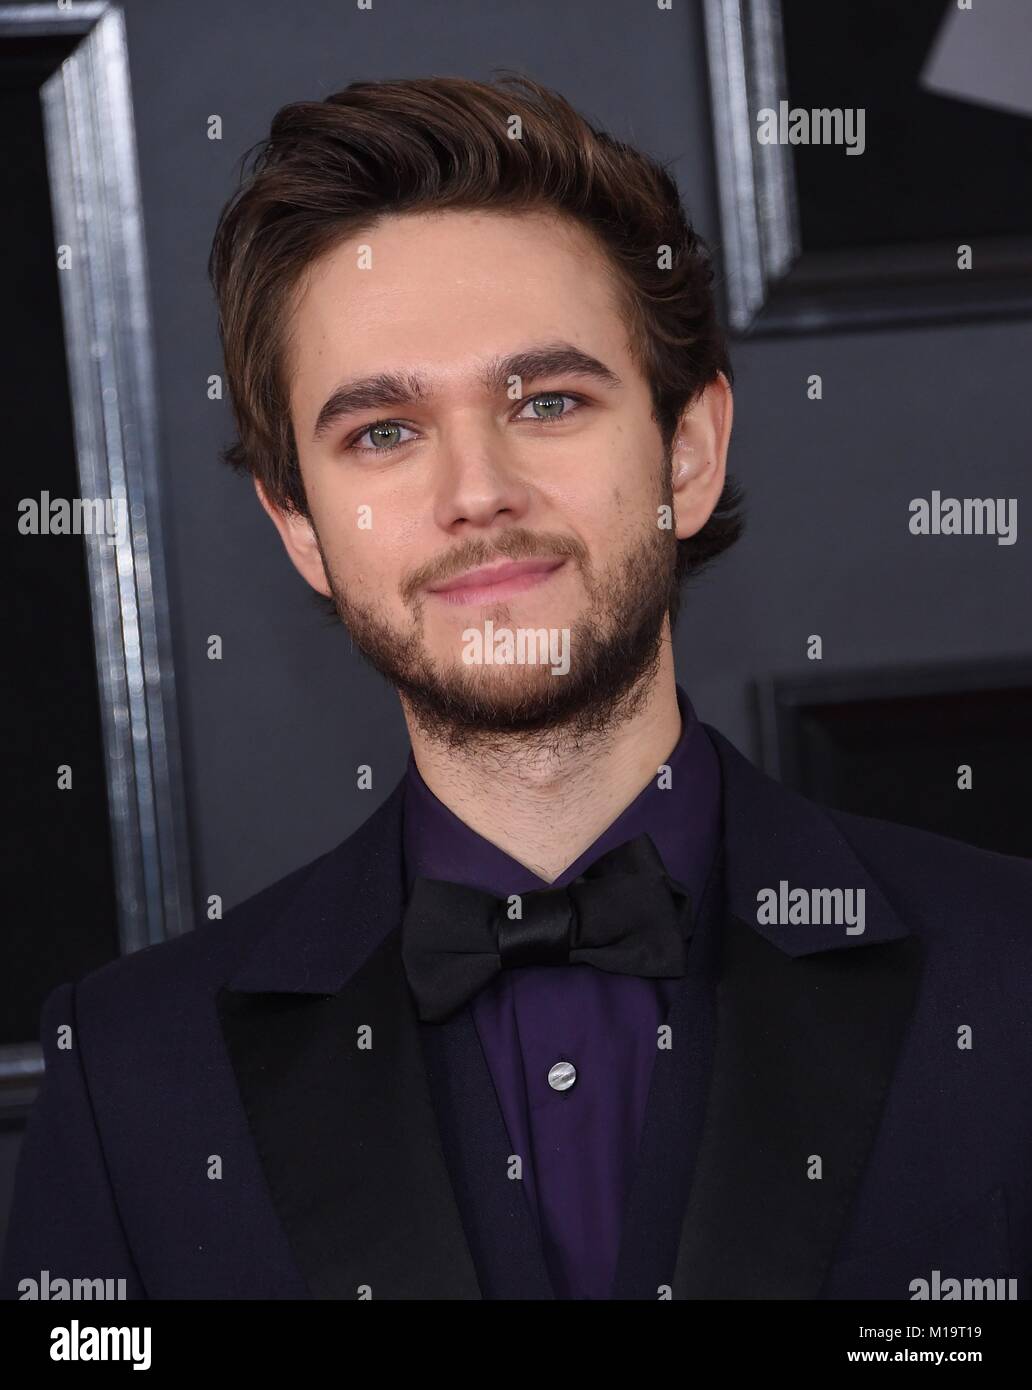 New York, NY, USA. 28th Jan, 2018. Zedd at arrivals, 60th Anniversary Grammy Awards - Arrivals, Madison Square Garden, New York, NY, United States January 28, 2018. (Photo by: Max Parker/Everett Collection) at arrivals for 60th Anniversary Grammy Awards - Arrivals, Madison Square Garden, New York, NY January 28, 2018. Credit: Max Parker/Everett Collection/Alamy Live News Stock Photo